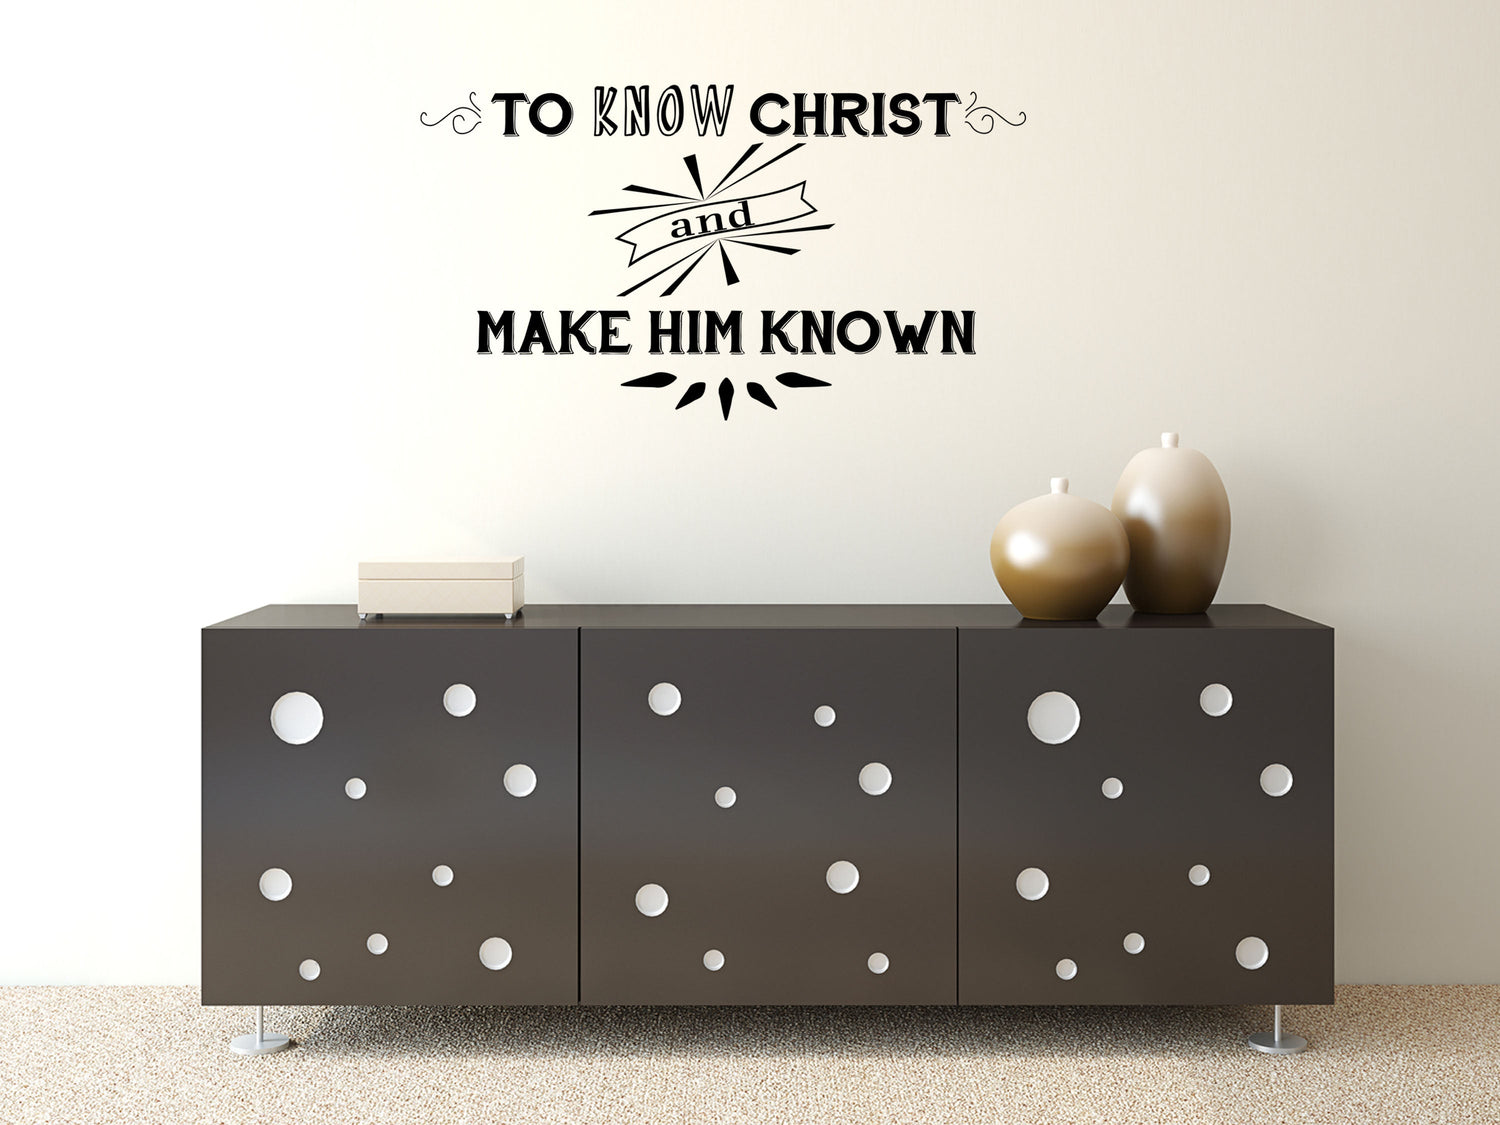 To Make Christ Known Bible Wall Decal - Inspirational Wall Signs Vinyl Wall Decal Inspirational Wall Signs 